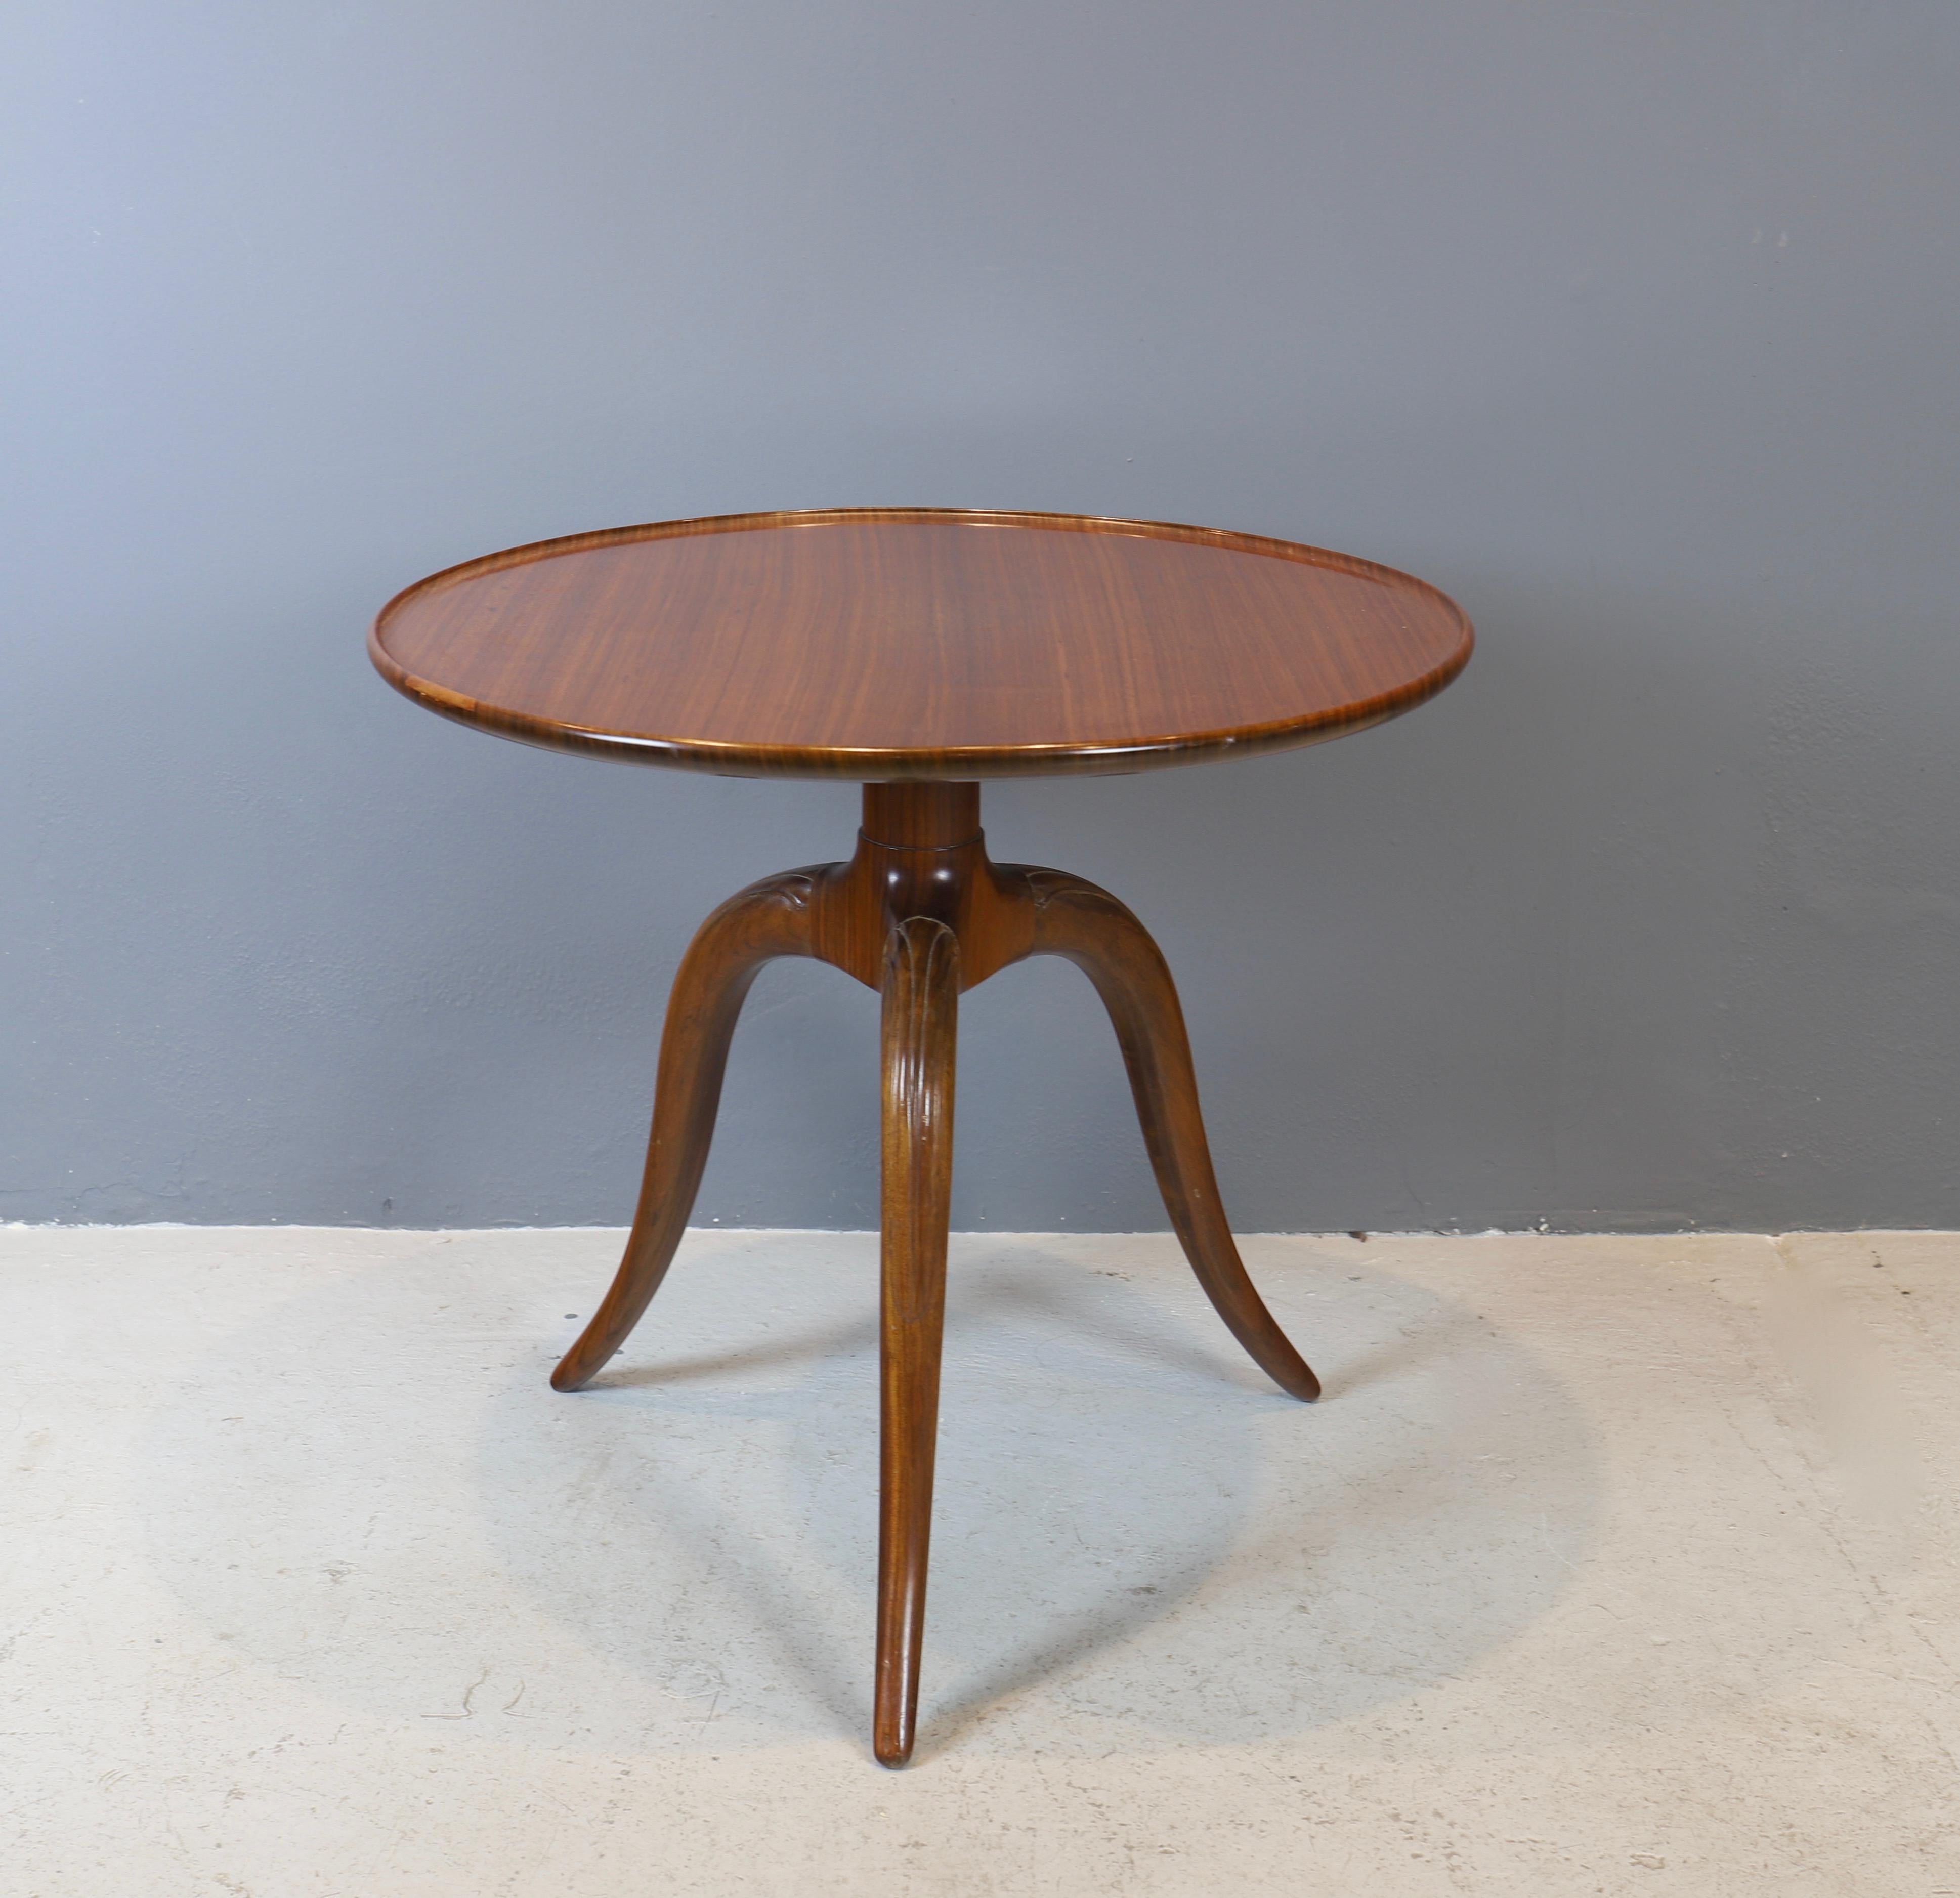 Circular, light mahogany side table by Frits Henningsen, circa 1940s.
Solid round top is supported by a column and three gently curved legs.
Incredible craftsmanship and detail.
Table is in beautiful original condition with warm patina.